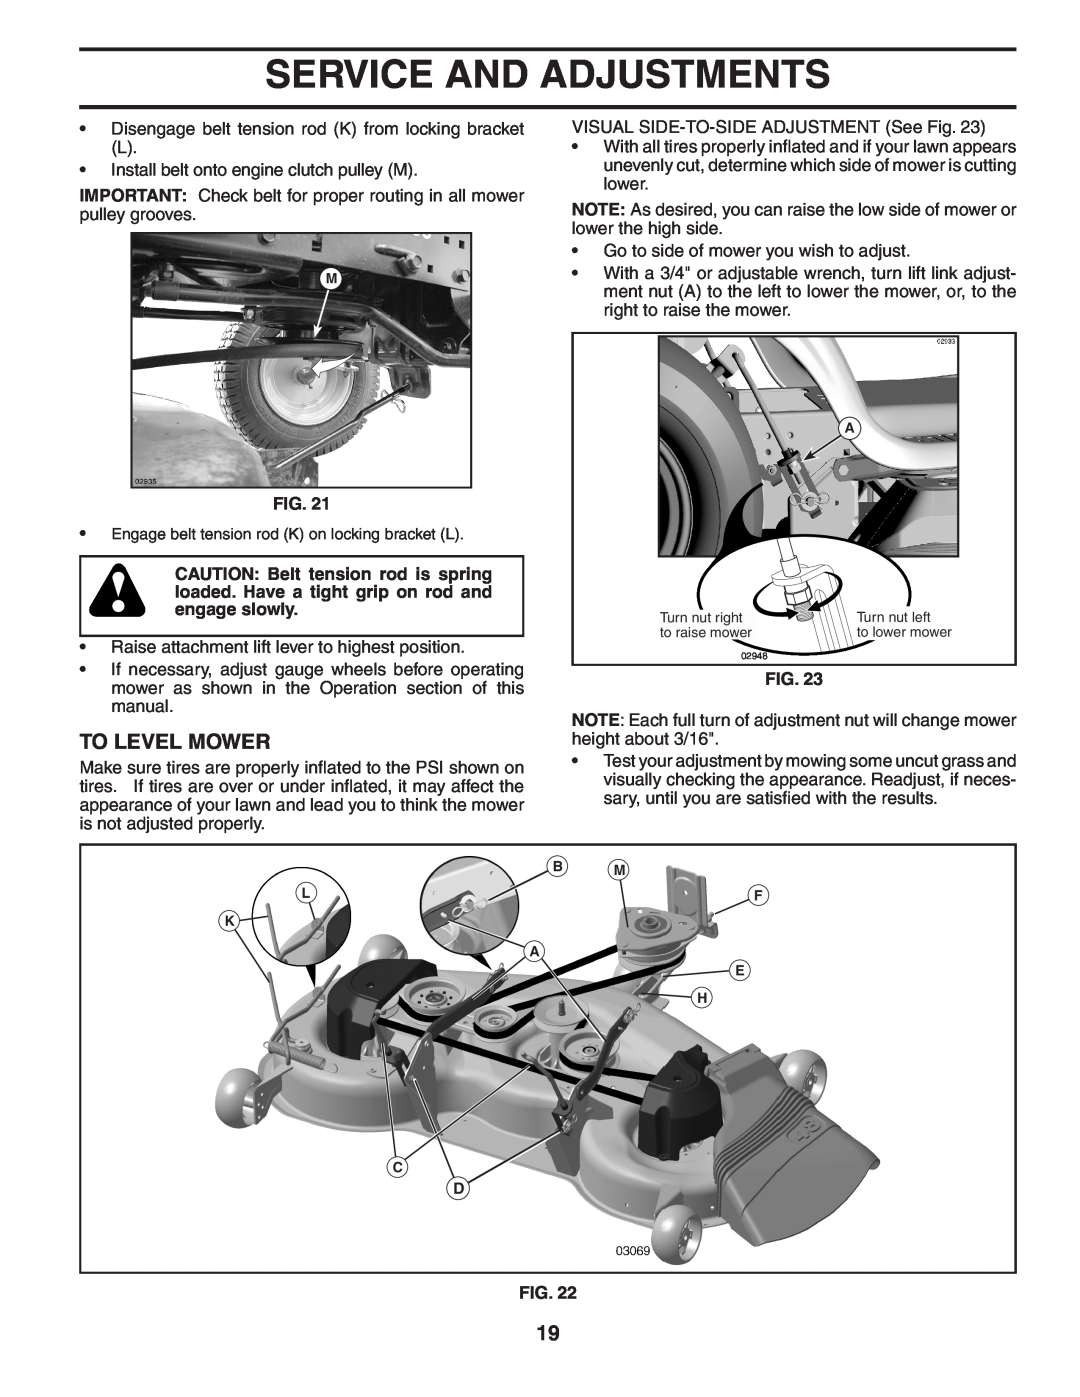 Poulan 402557, 96042001000 manual To Level Mower, Service And Adjustments 